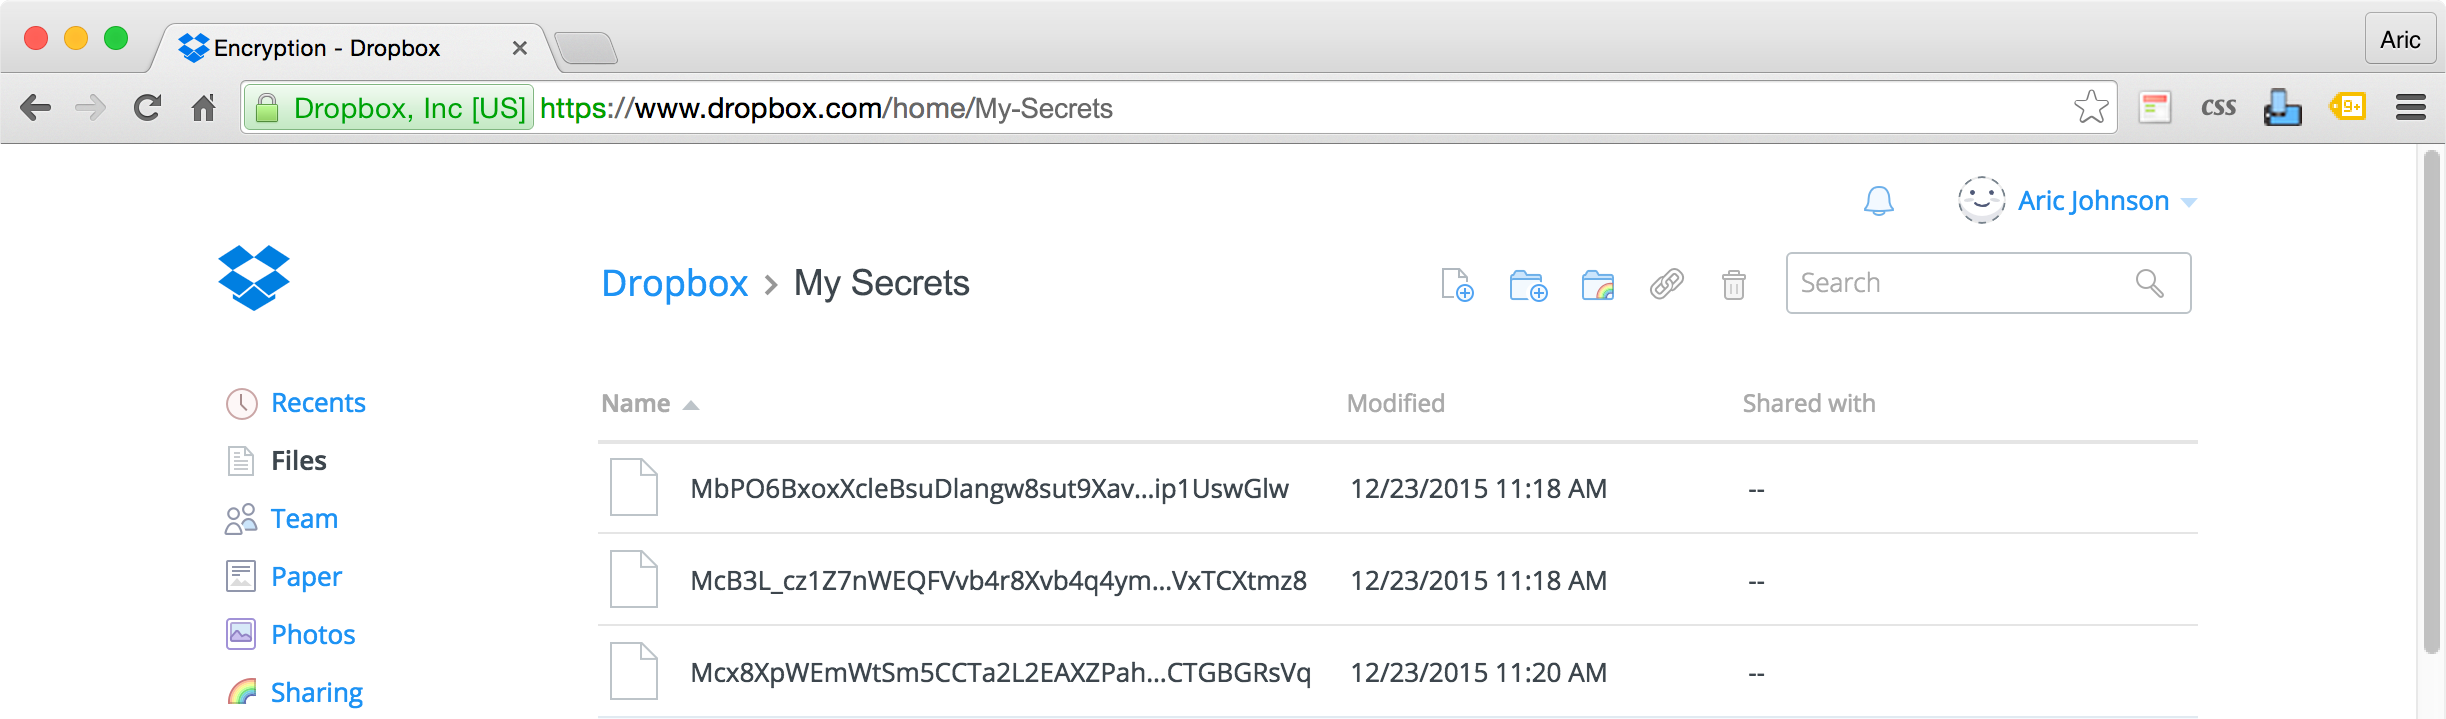 Files are encrypted in storage